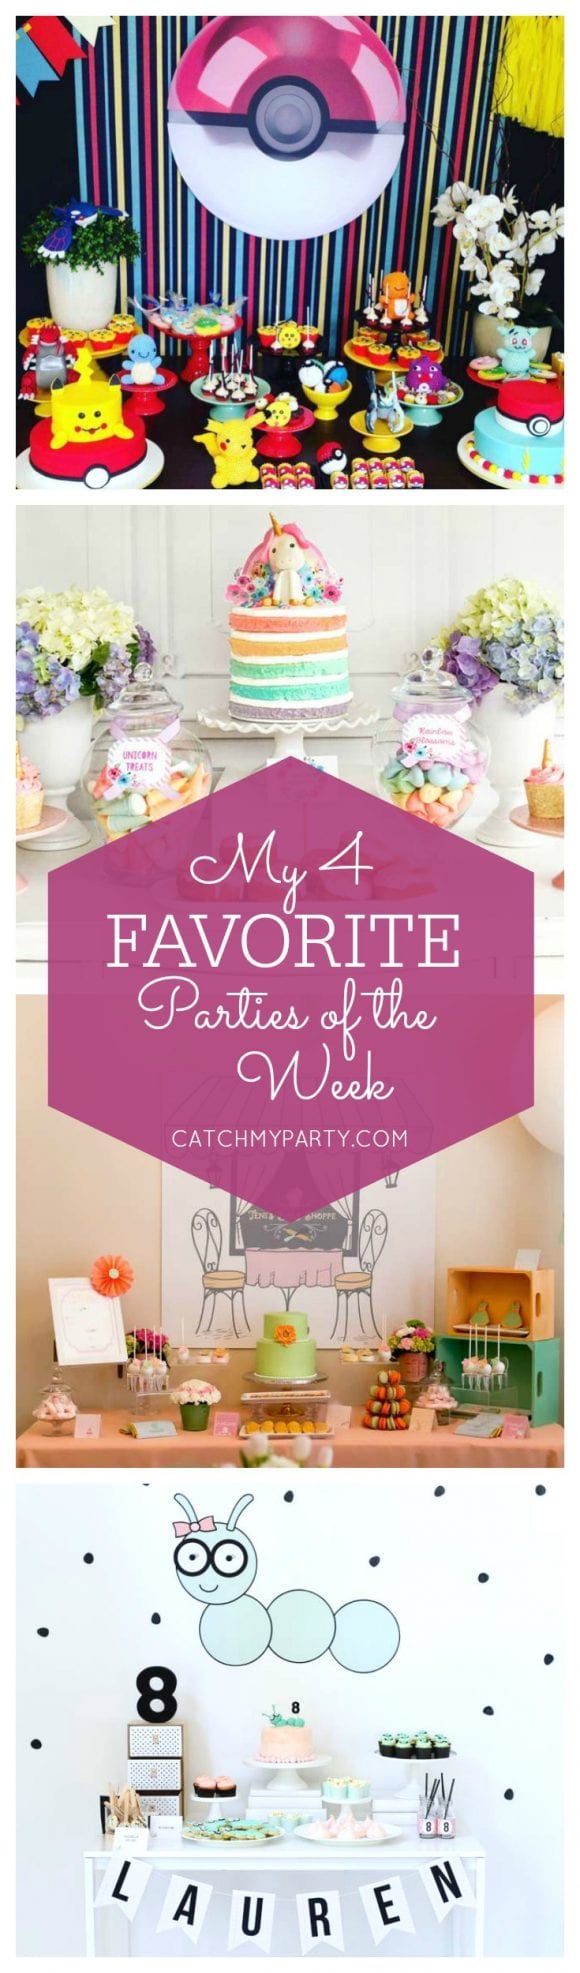 My favorite parties this week include an fun Pokemon birthday party, a gorgeous unicorn birthday party, a delicious baking birthday party and a cute bookworm birthday party.